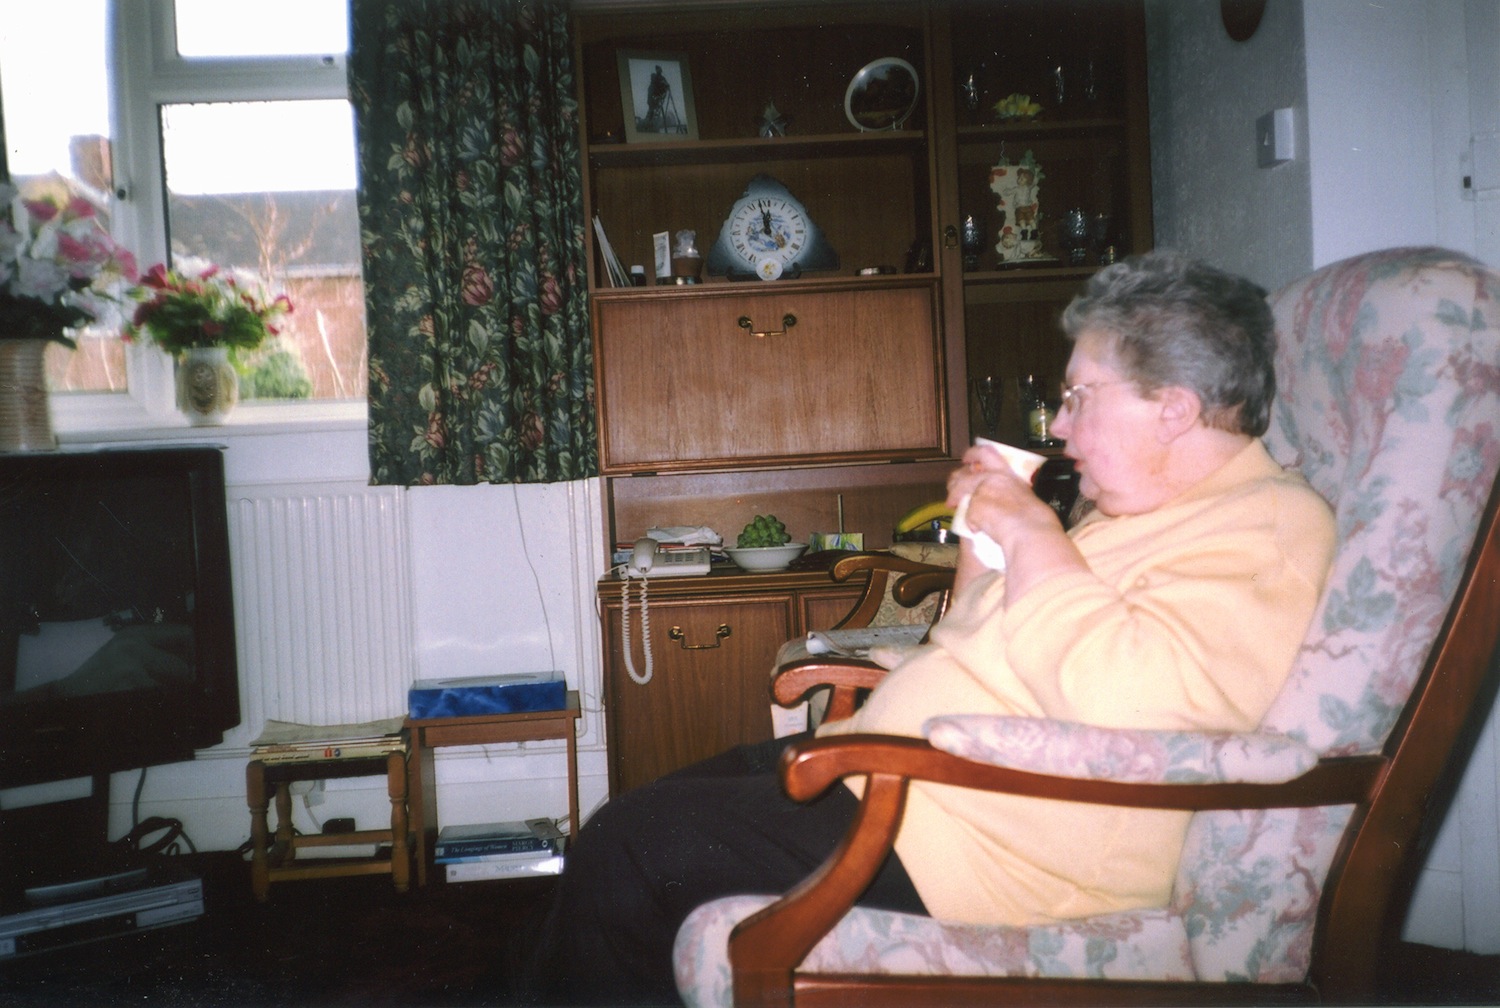  This is my Mum.&nbsp; It is a contented and peaceful photo.&nbsp; My Mum has coped with a lot.&nbsp; Her first husband was killed in the war and my father suffered with a mental illness.&nbsp; My mother cared for me and then for me when I was ill.&n